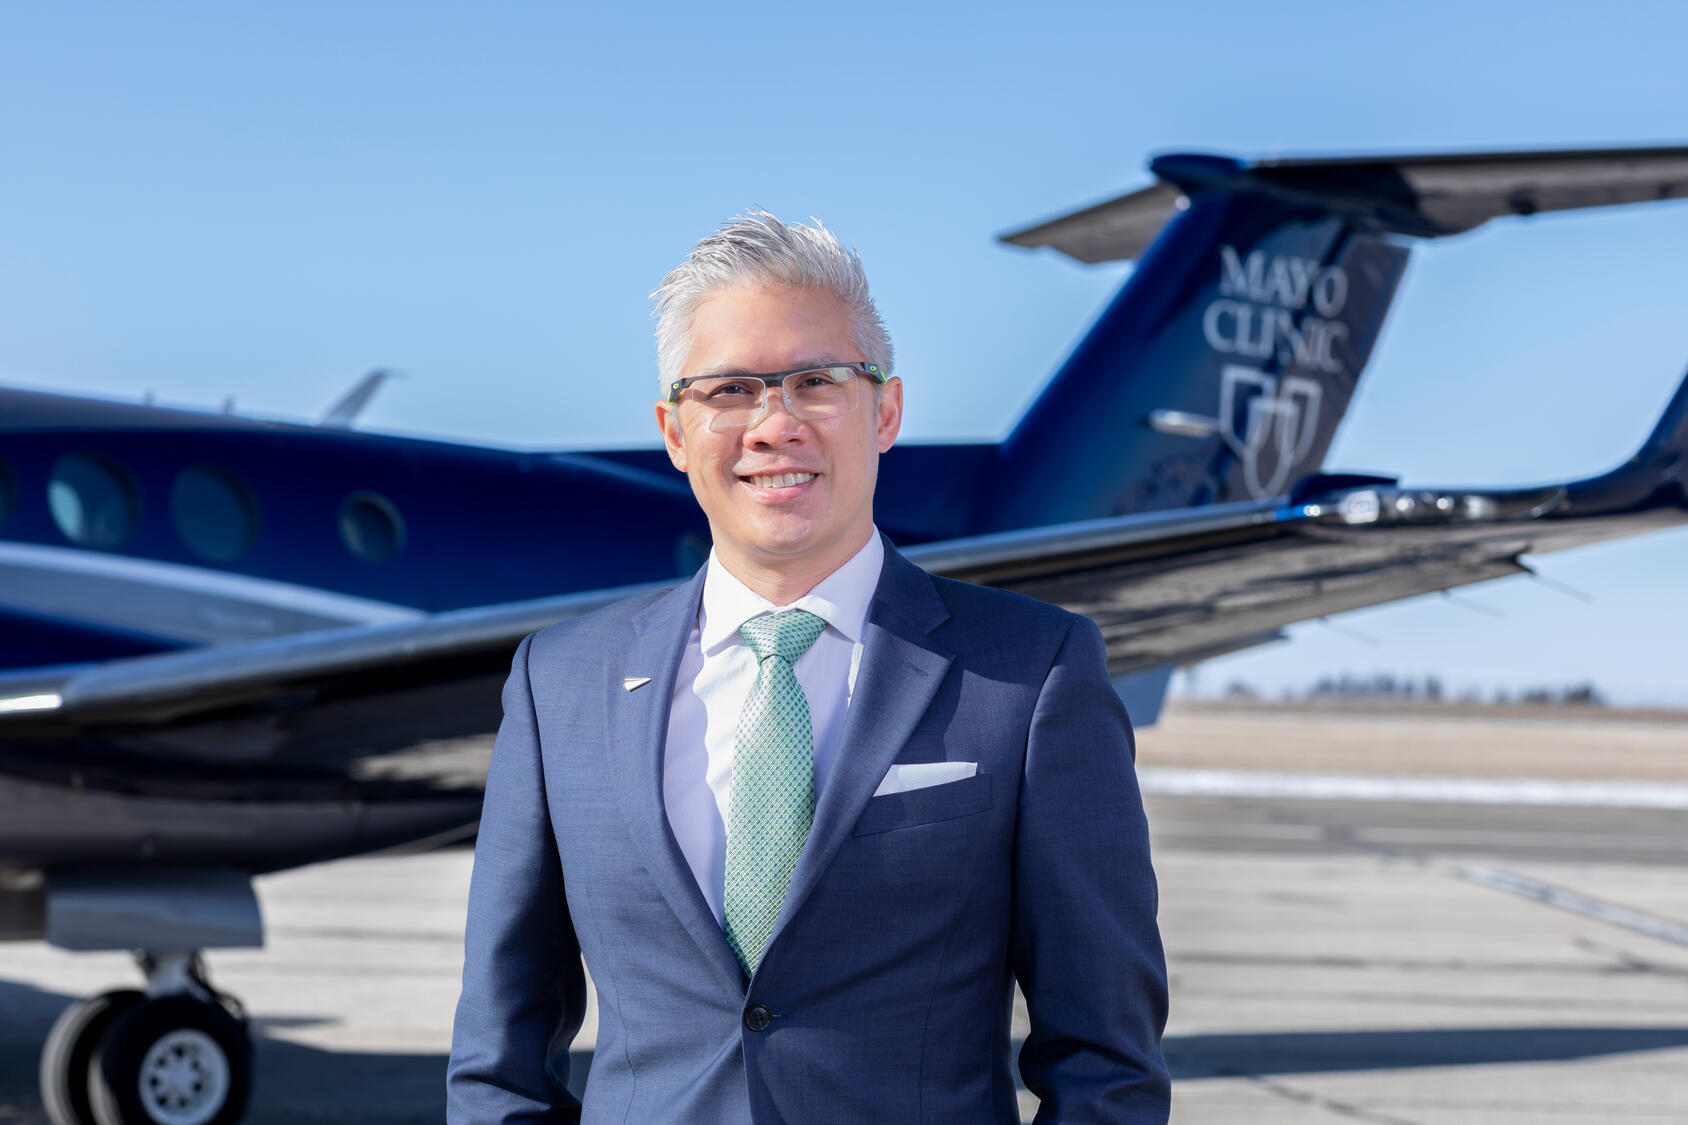 Man wearing blue suit stands in front of airplane